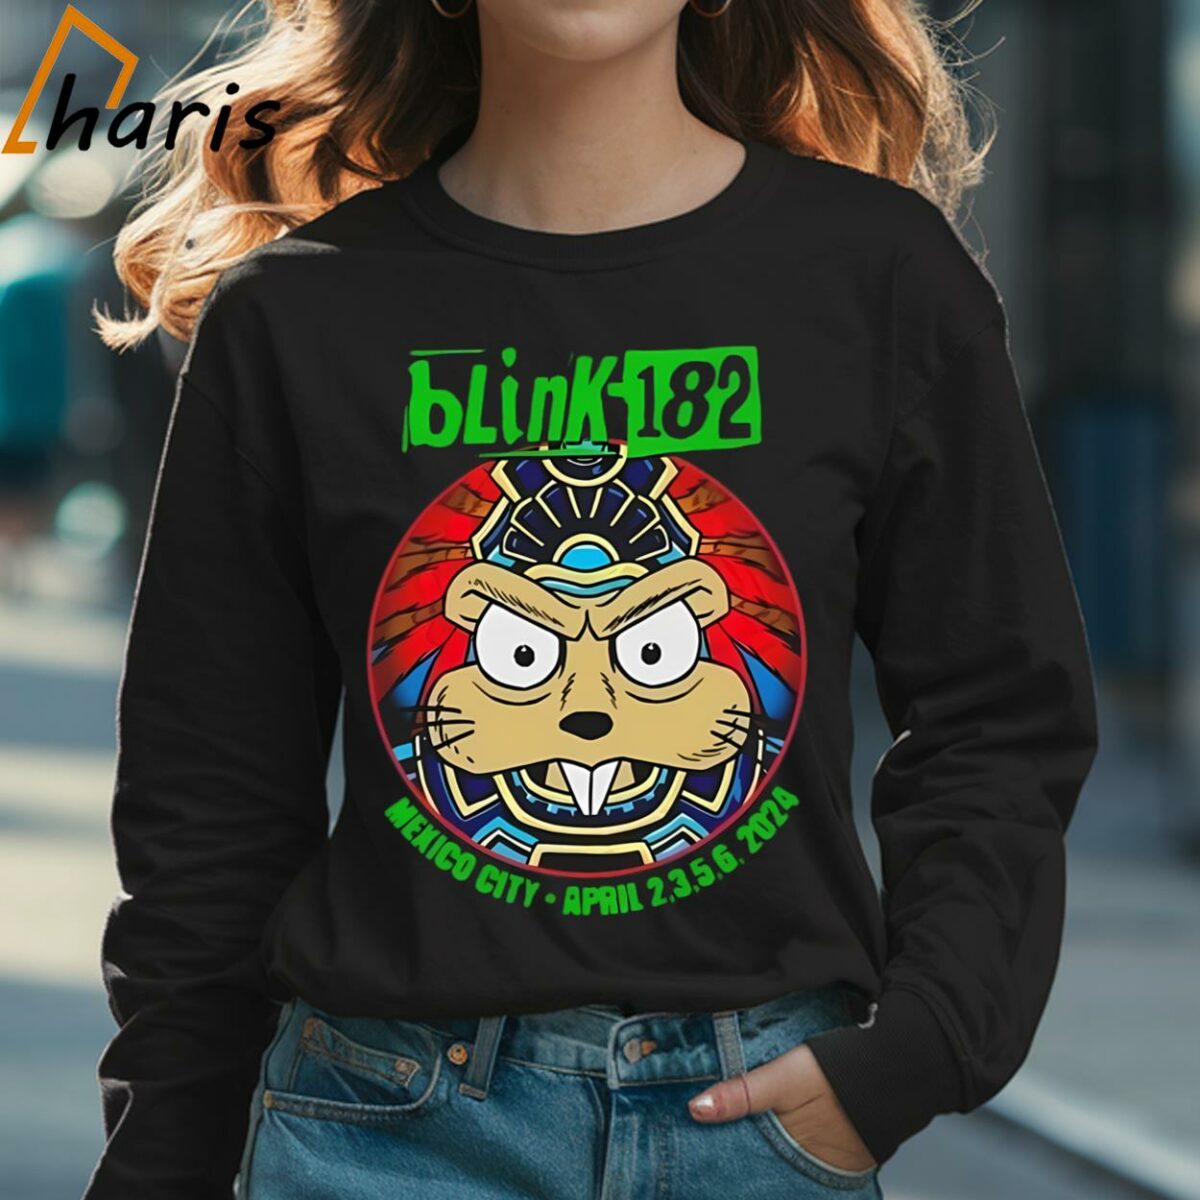 Blink 182 One More Time Tour April 2024 Mexico City Shirt 3 Long sleeve shirt